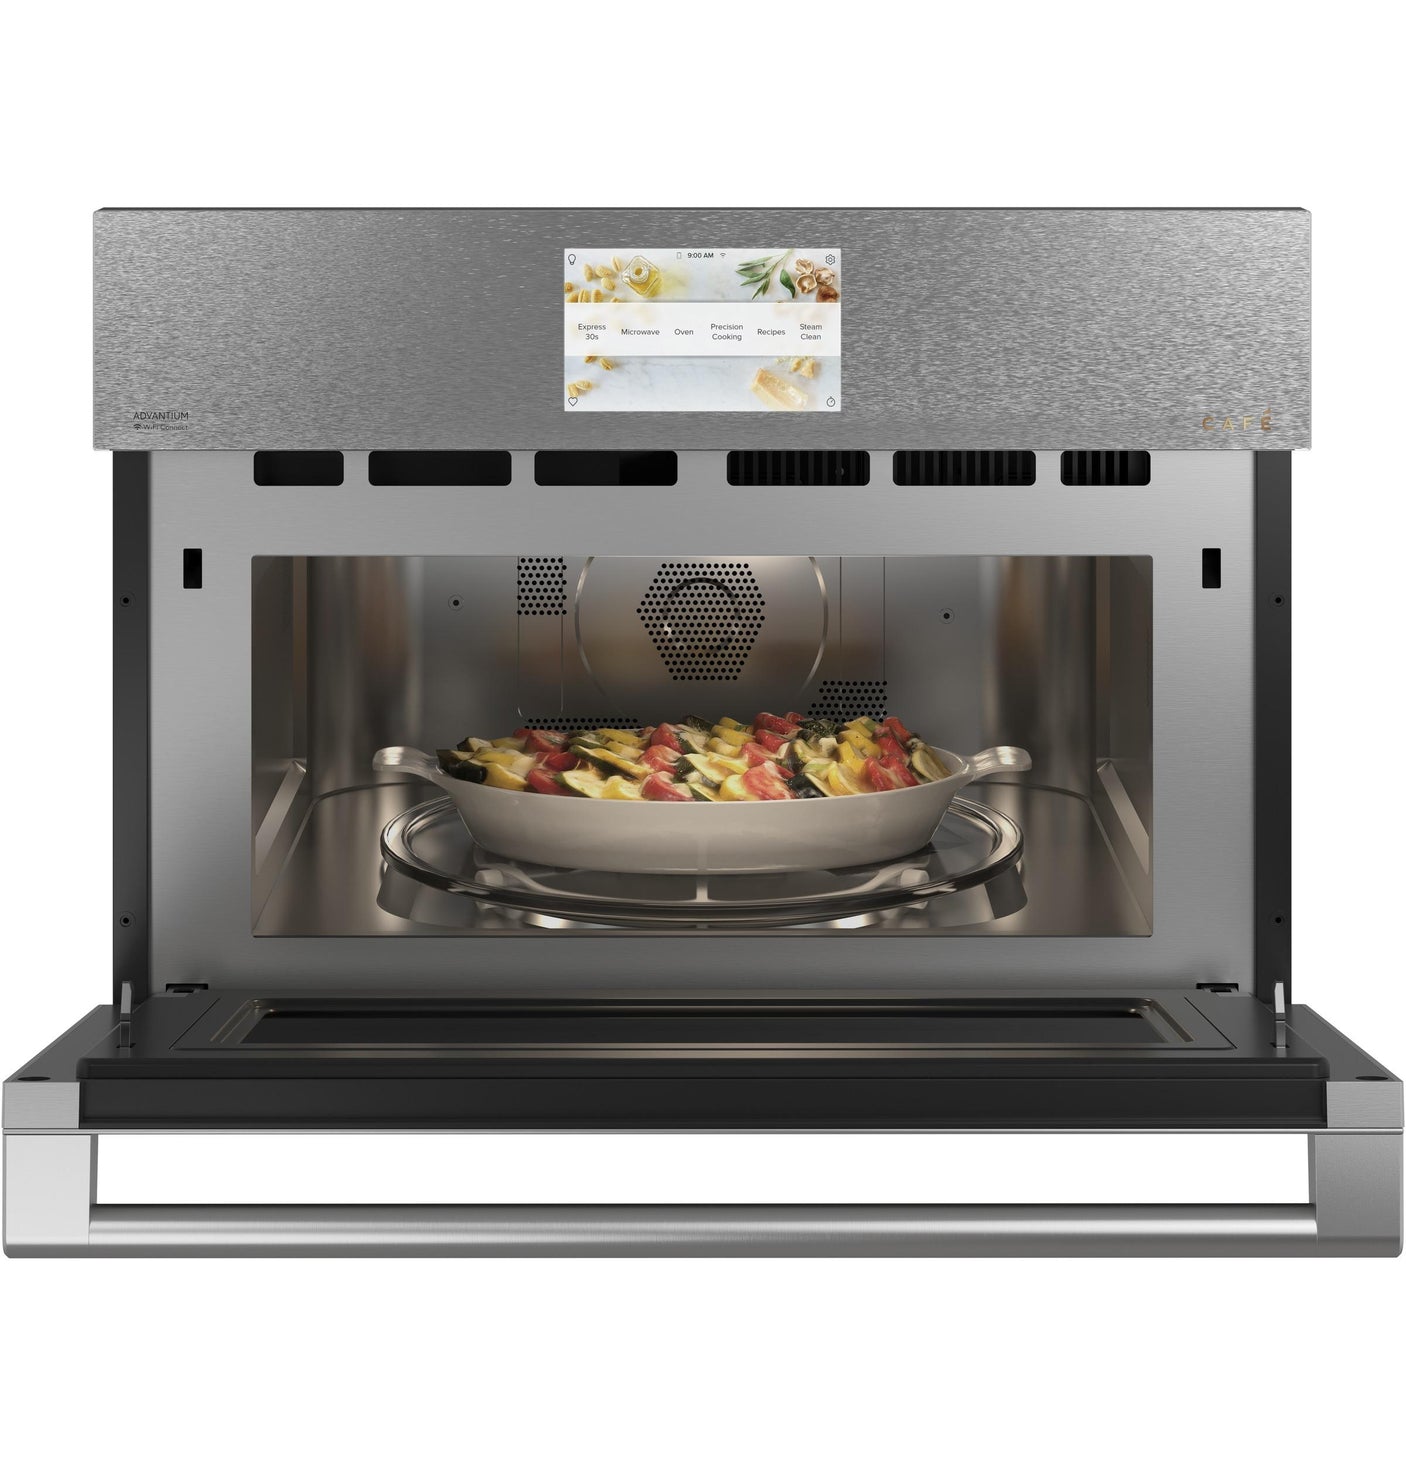 Café™ 27" Smart Five in One Oven with 120V Advantium® Technology in Platinum Glass